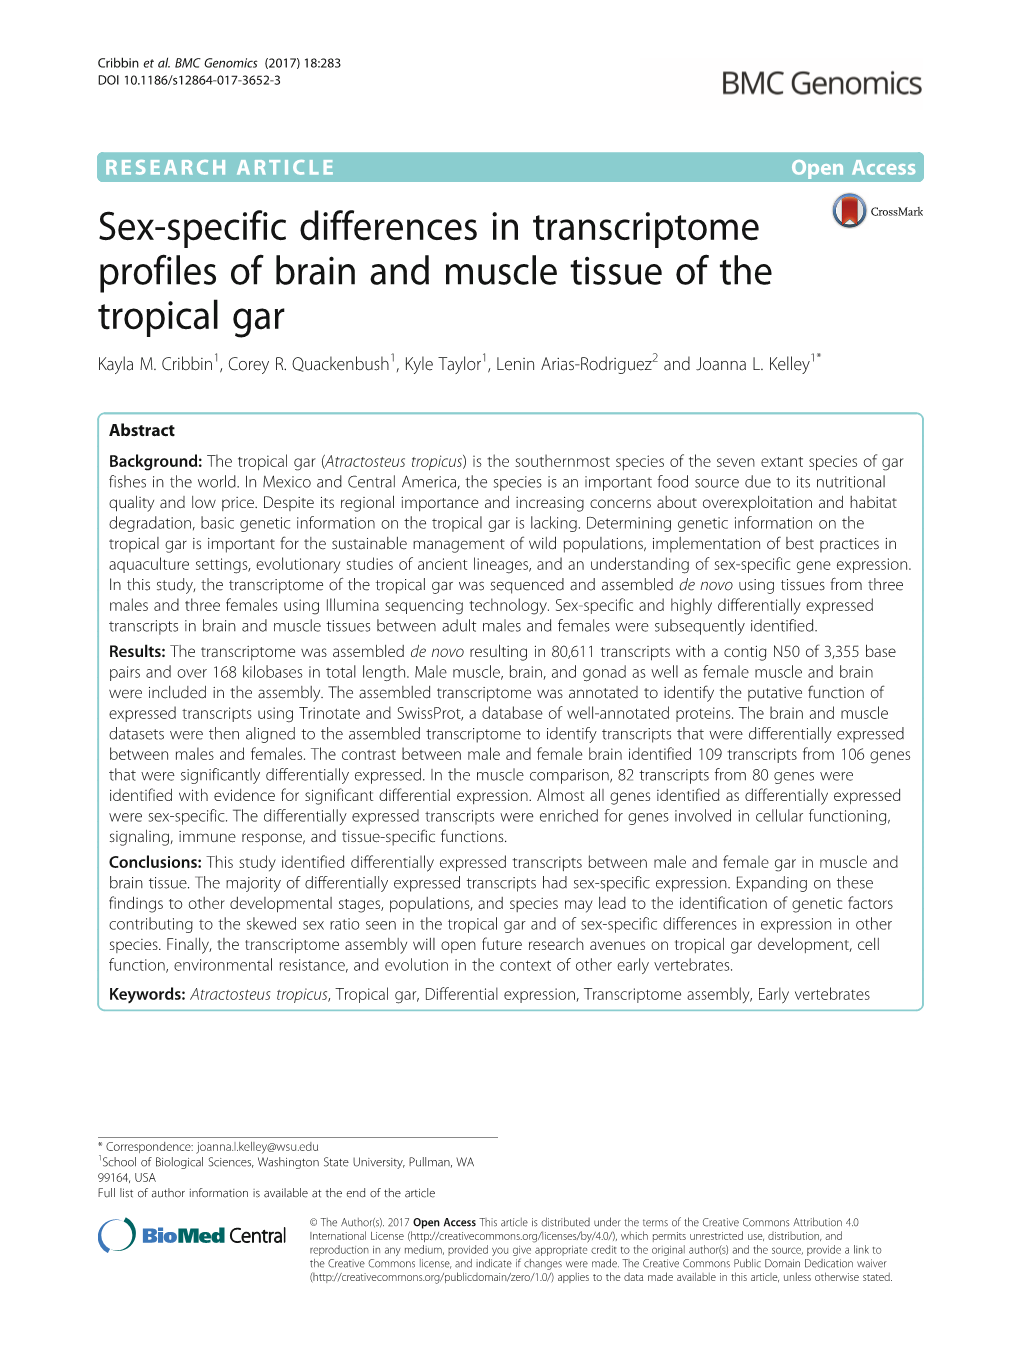 Sex-Specific Differences in Transcriptome Profiles of Brain and Muscle Tissue of the Tropical Gar Kayla M